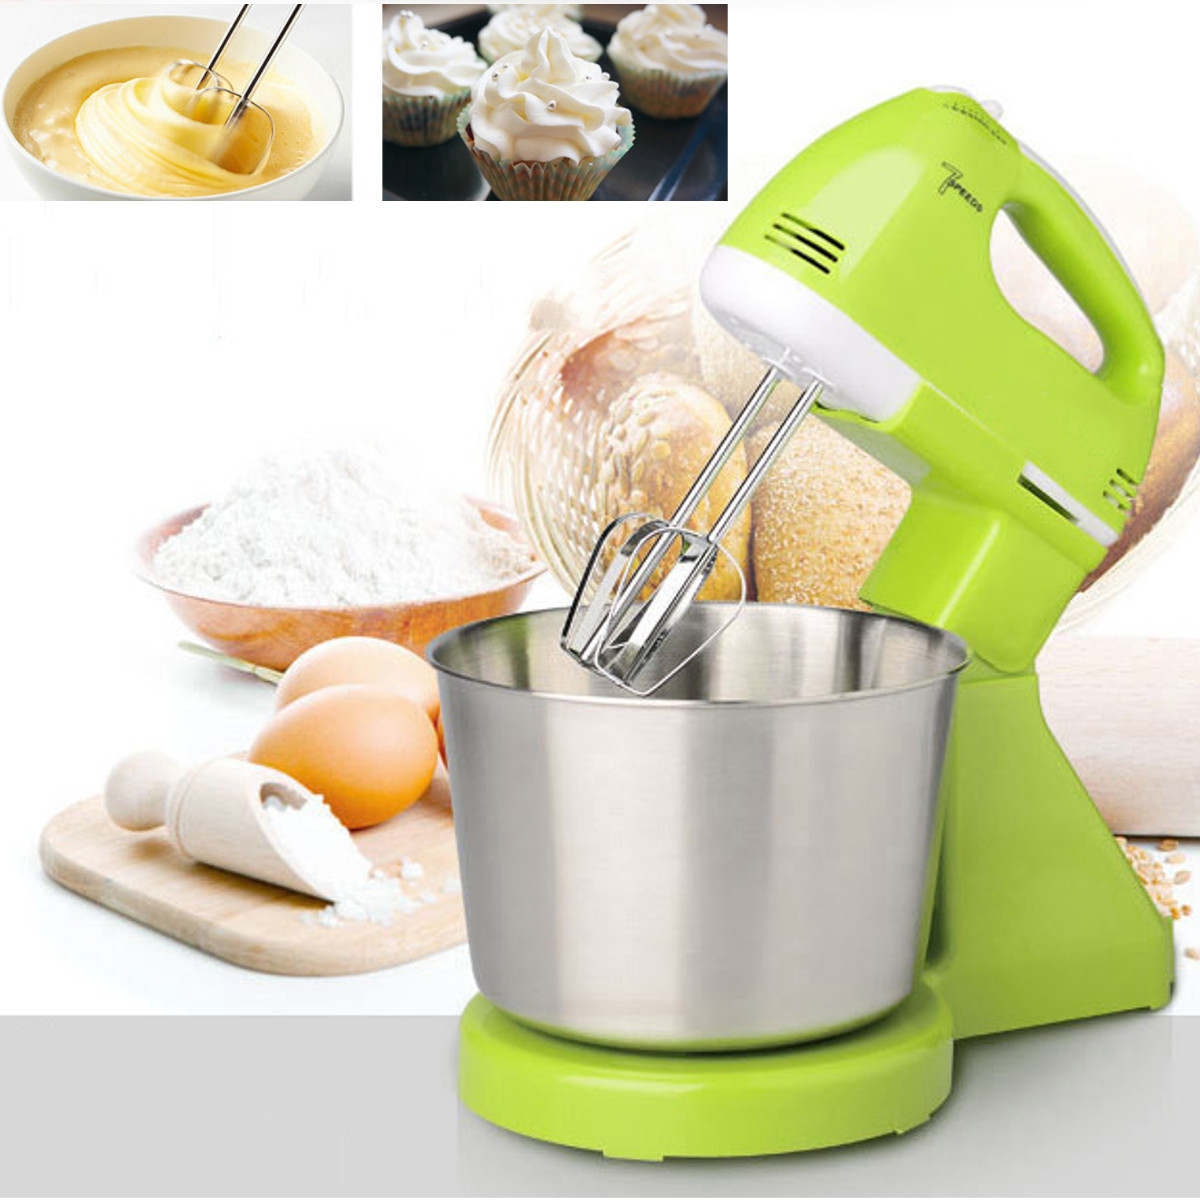 7 Speed Electric Egg Beater Dough Cakes Bread Egg Stand Mixer + Hand Blender + Bowl Food Mixer Kitchen Accessories Egg Tools 45